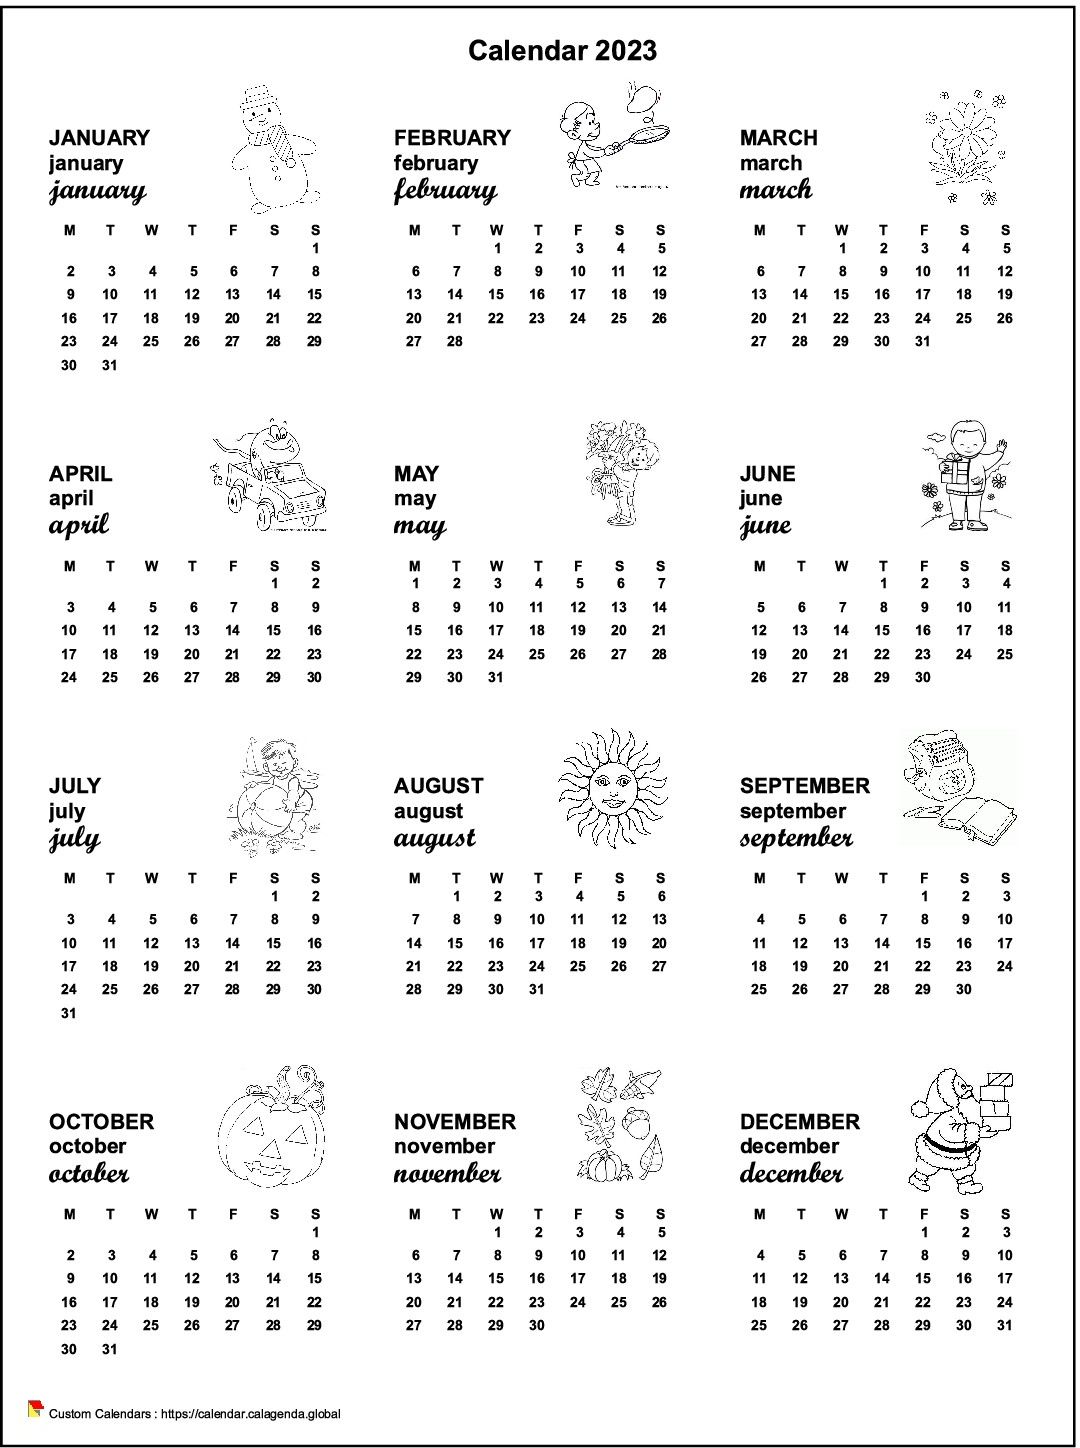 Calendar 2043 annual maternal and primary school